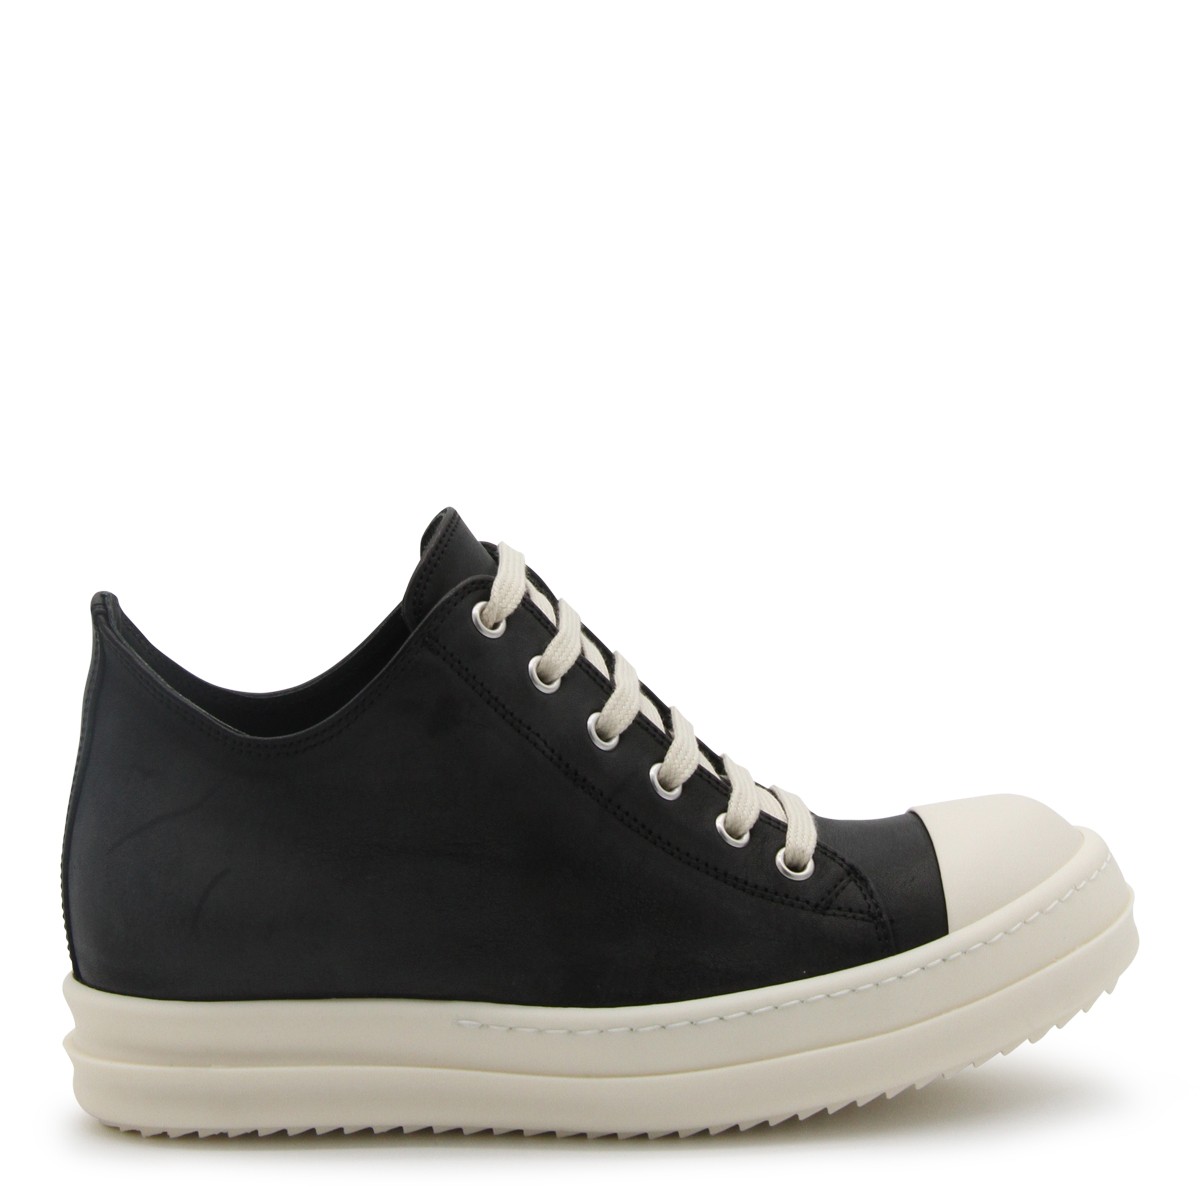 BLACK AND MILK LEATHER SNEAKERS